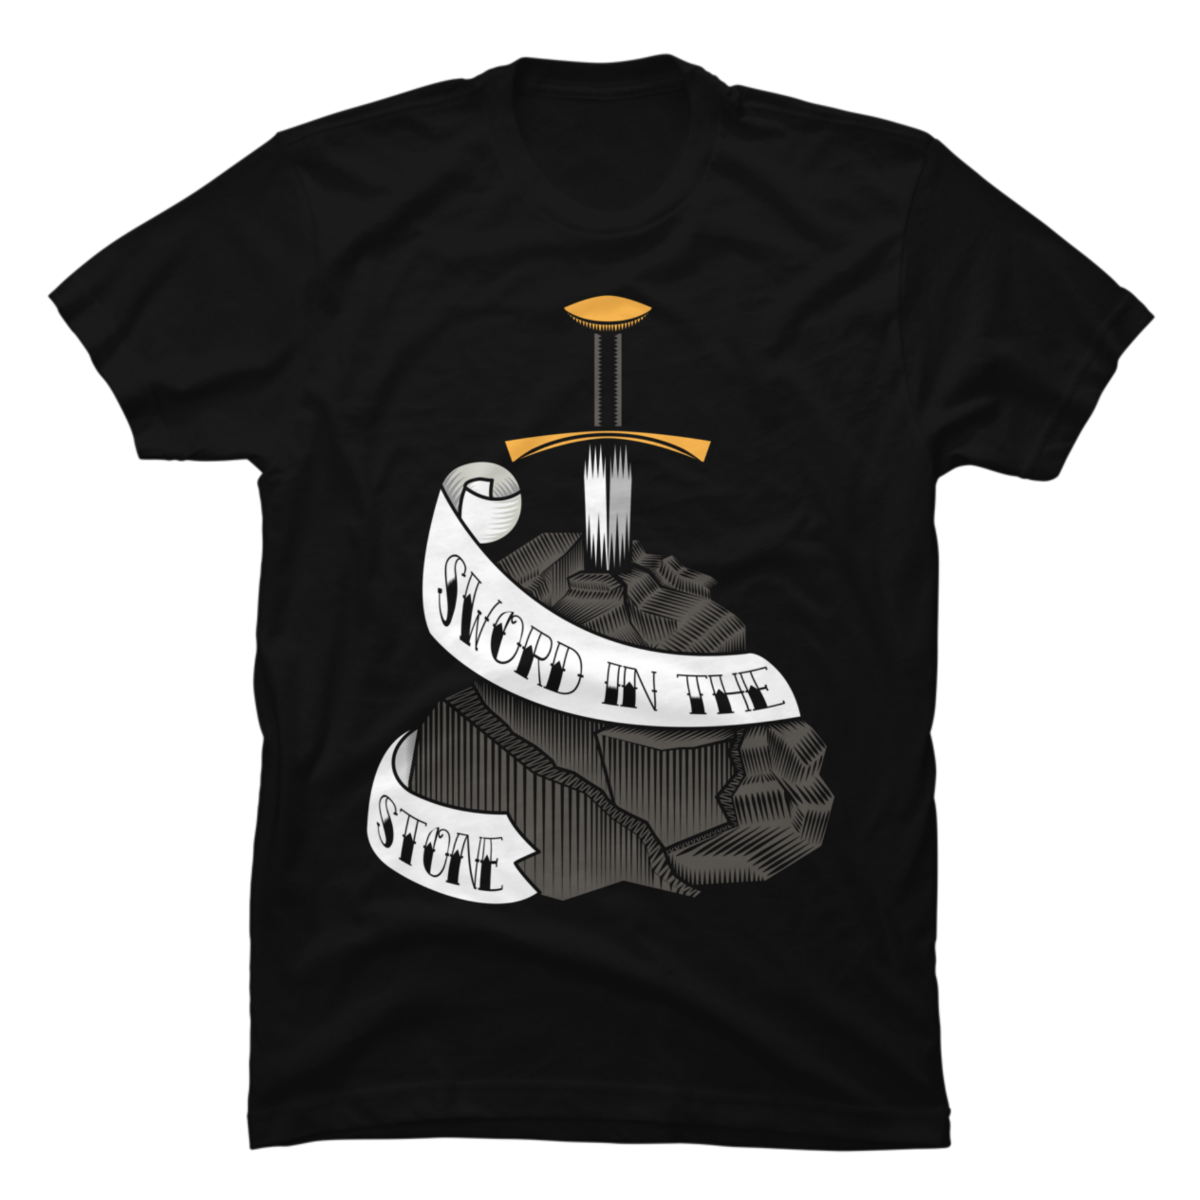 sword in the stone t shirt